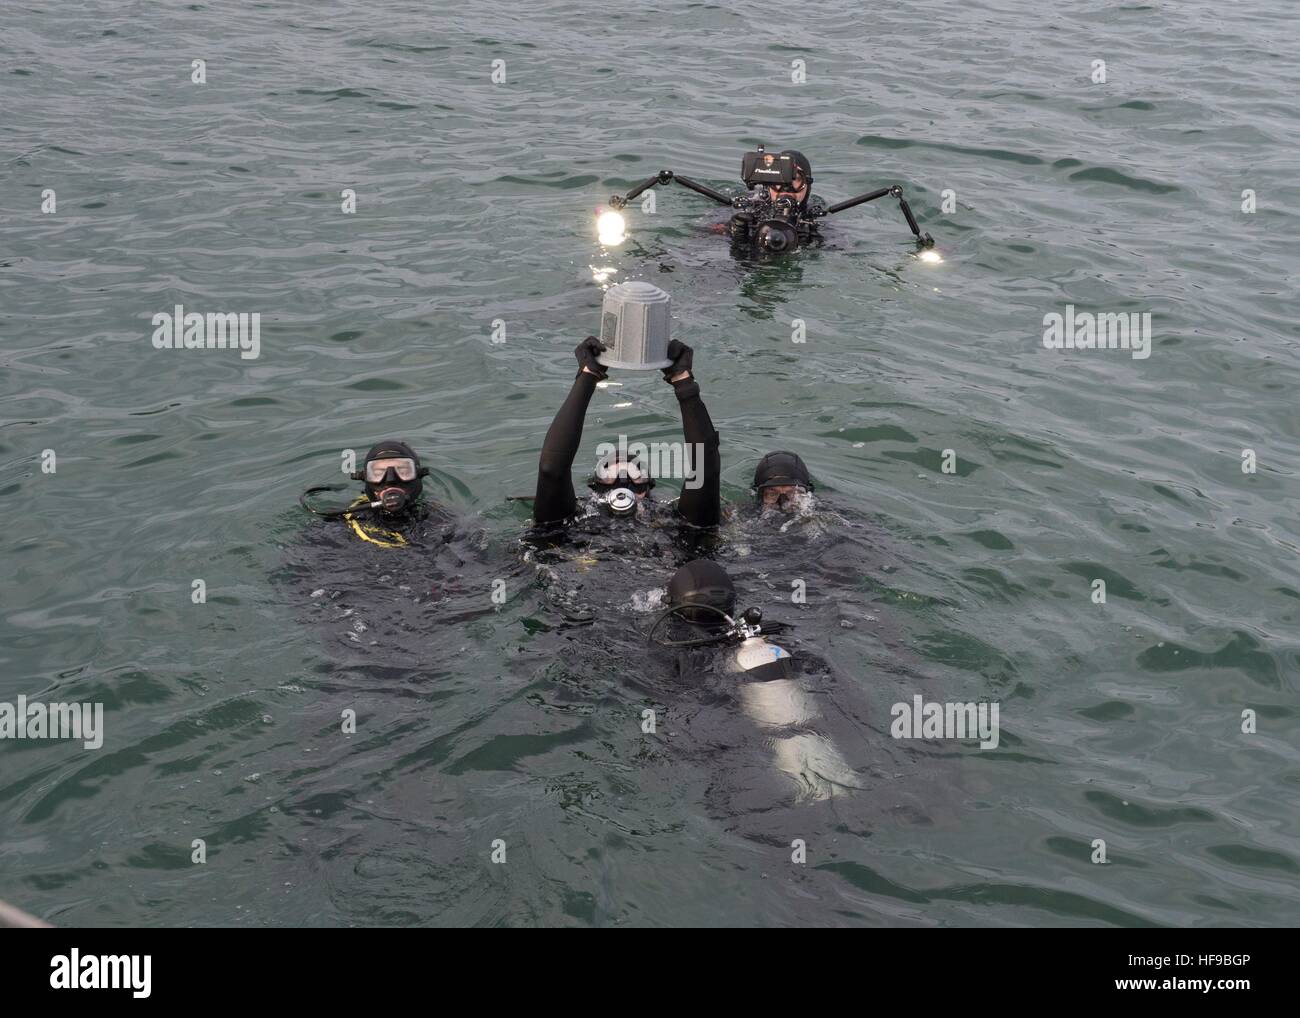 USN soldiers and National Park Service divers prepare the ashes of John D. Anderson for interment at a memorial service during the 75th Anniversary Commemoration of the Pearl Harbor attacks at the USS Arizona Memorial December 7, 2016 in Pearl Harbor, Hawaii. Stock Photo